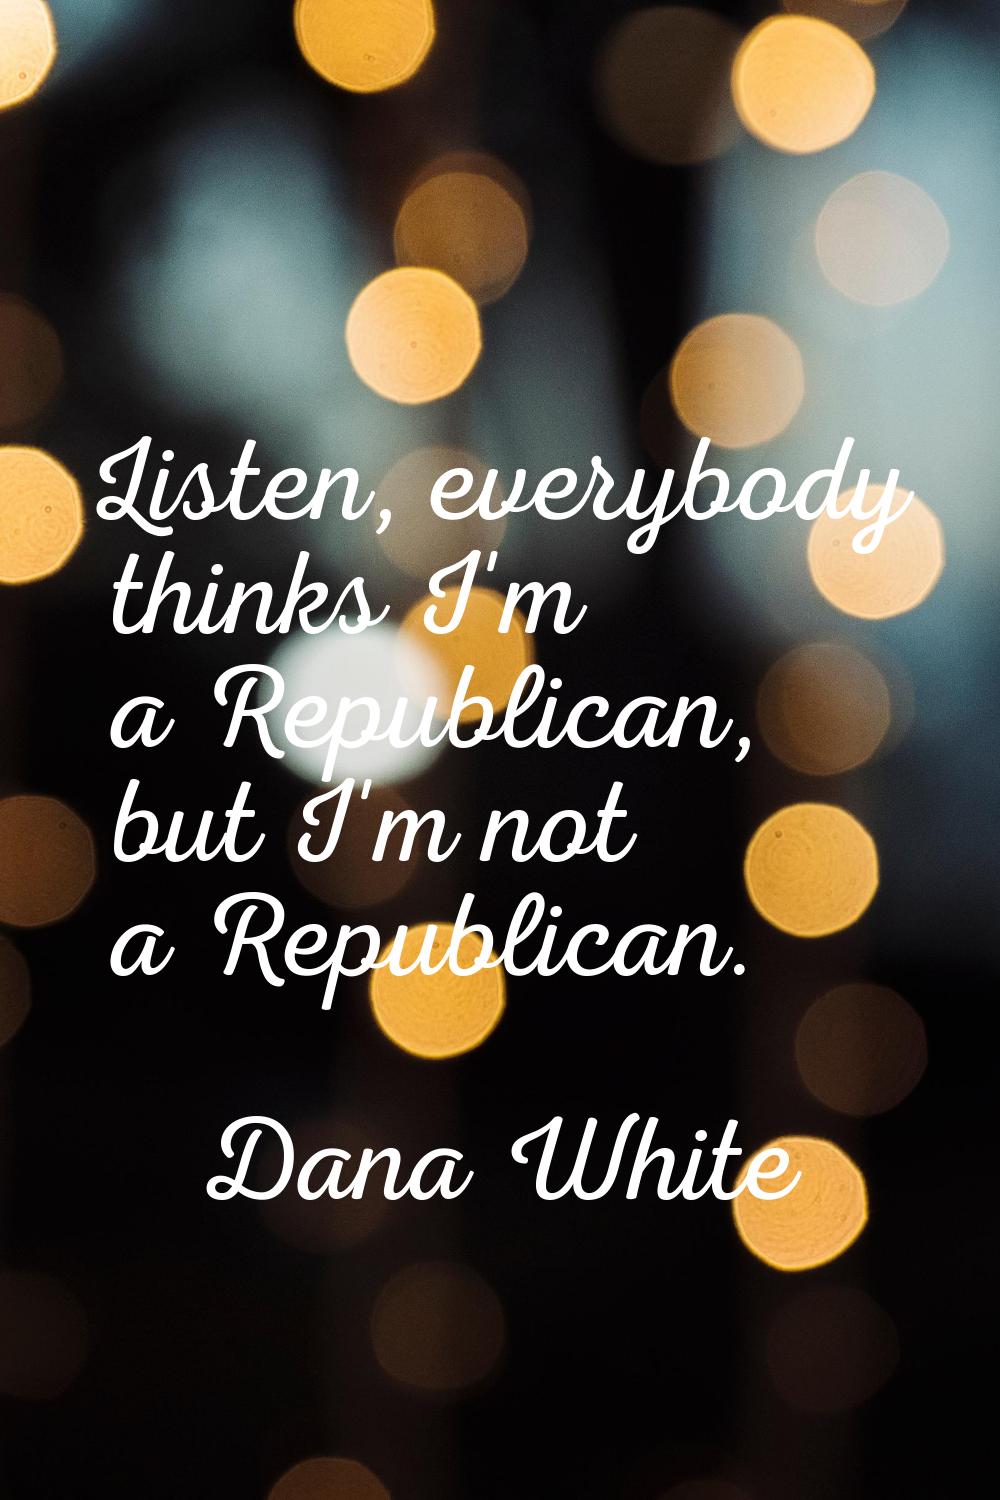 Listen, everybody thinks I'm a Republican, but I'm not a Republican.